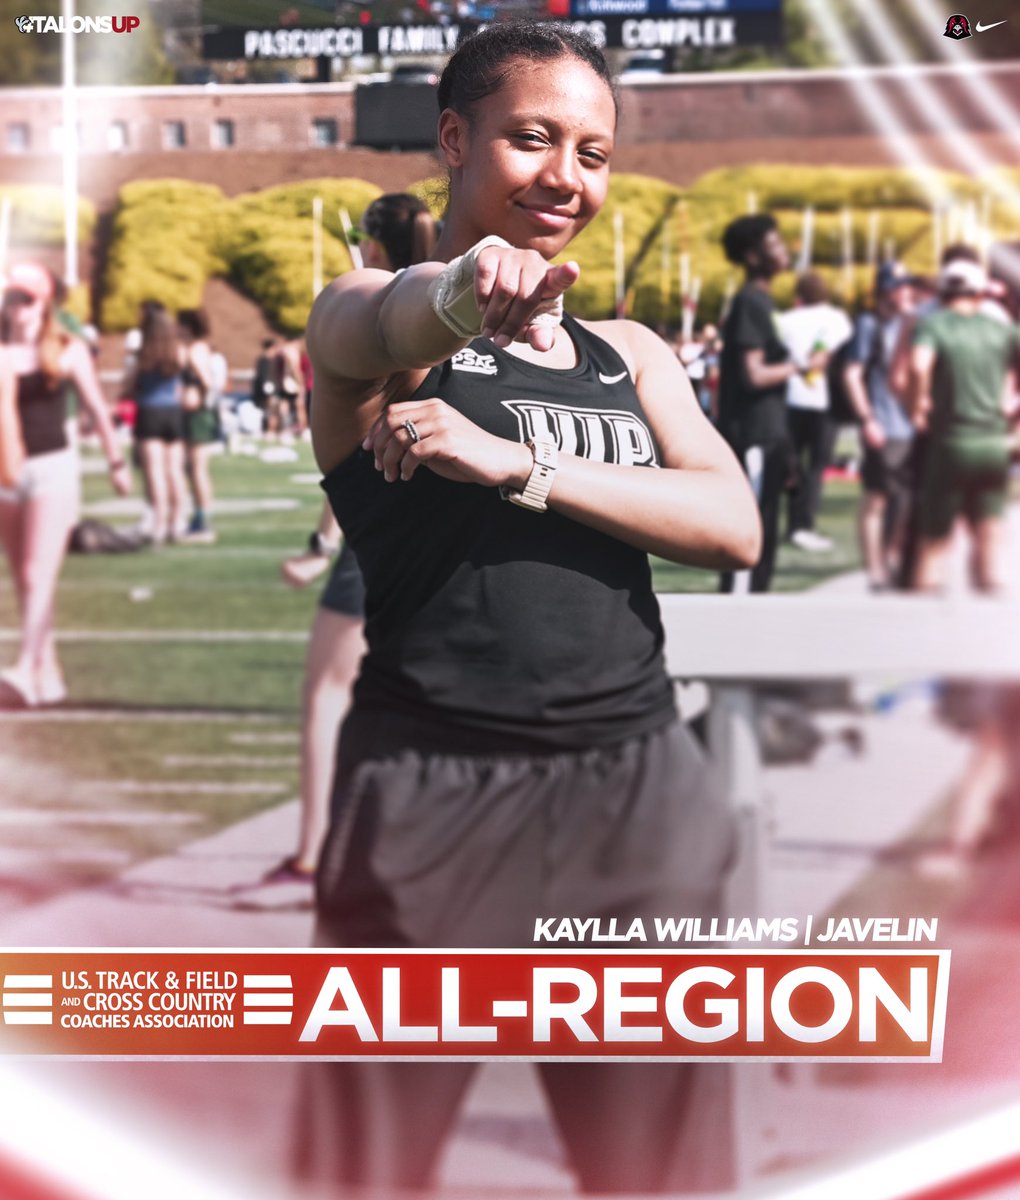 Dan Gibney (3000S, 10,000m) and Kaylla Williams (javelin) were named USTFCCA All-Region, finishing among the top five individuals in the Atlantic Region. 

#TalonsUp 

More: ustfccca.org/2024/05/featur…